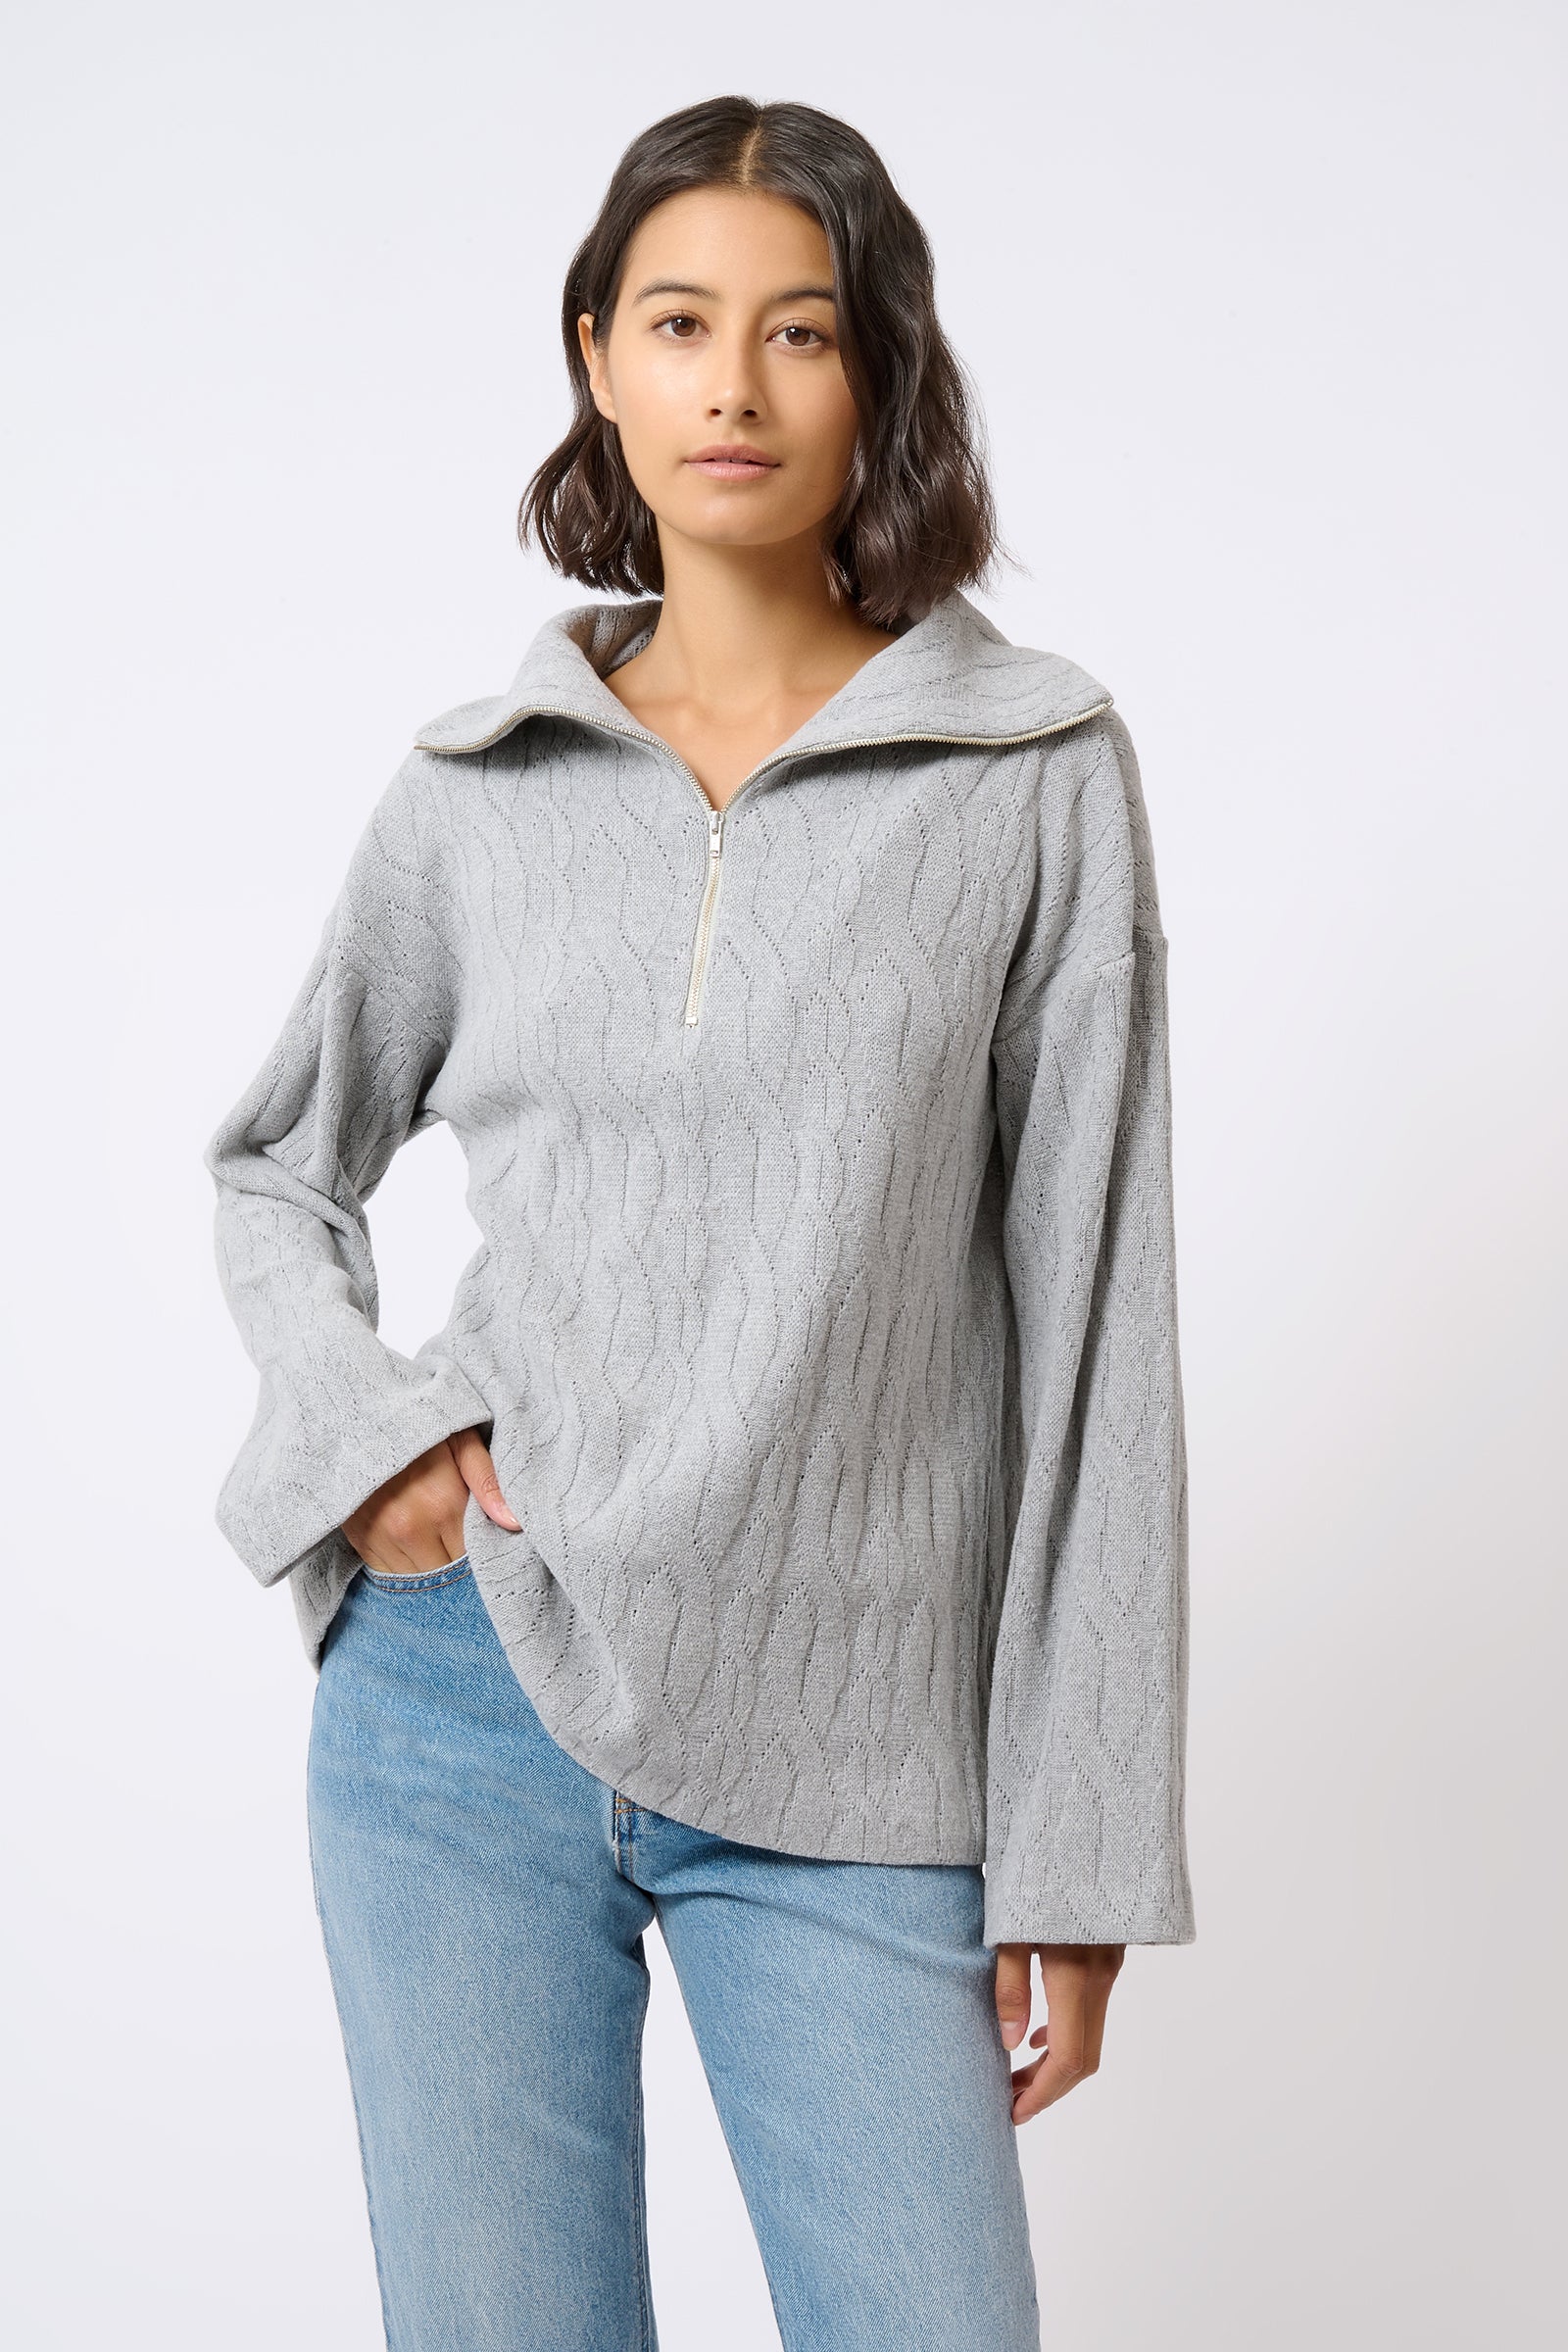 Kal Rieman Sandra Collared Zip Pullover Cable Knit in Grey on Model with Hand in Pocket Front View